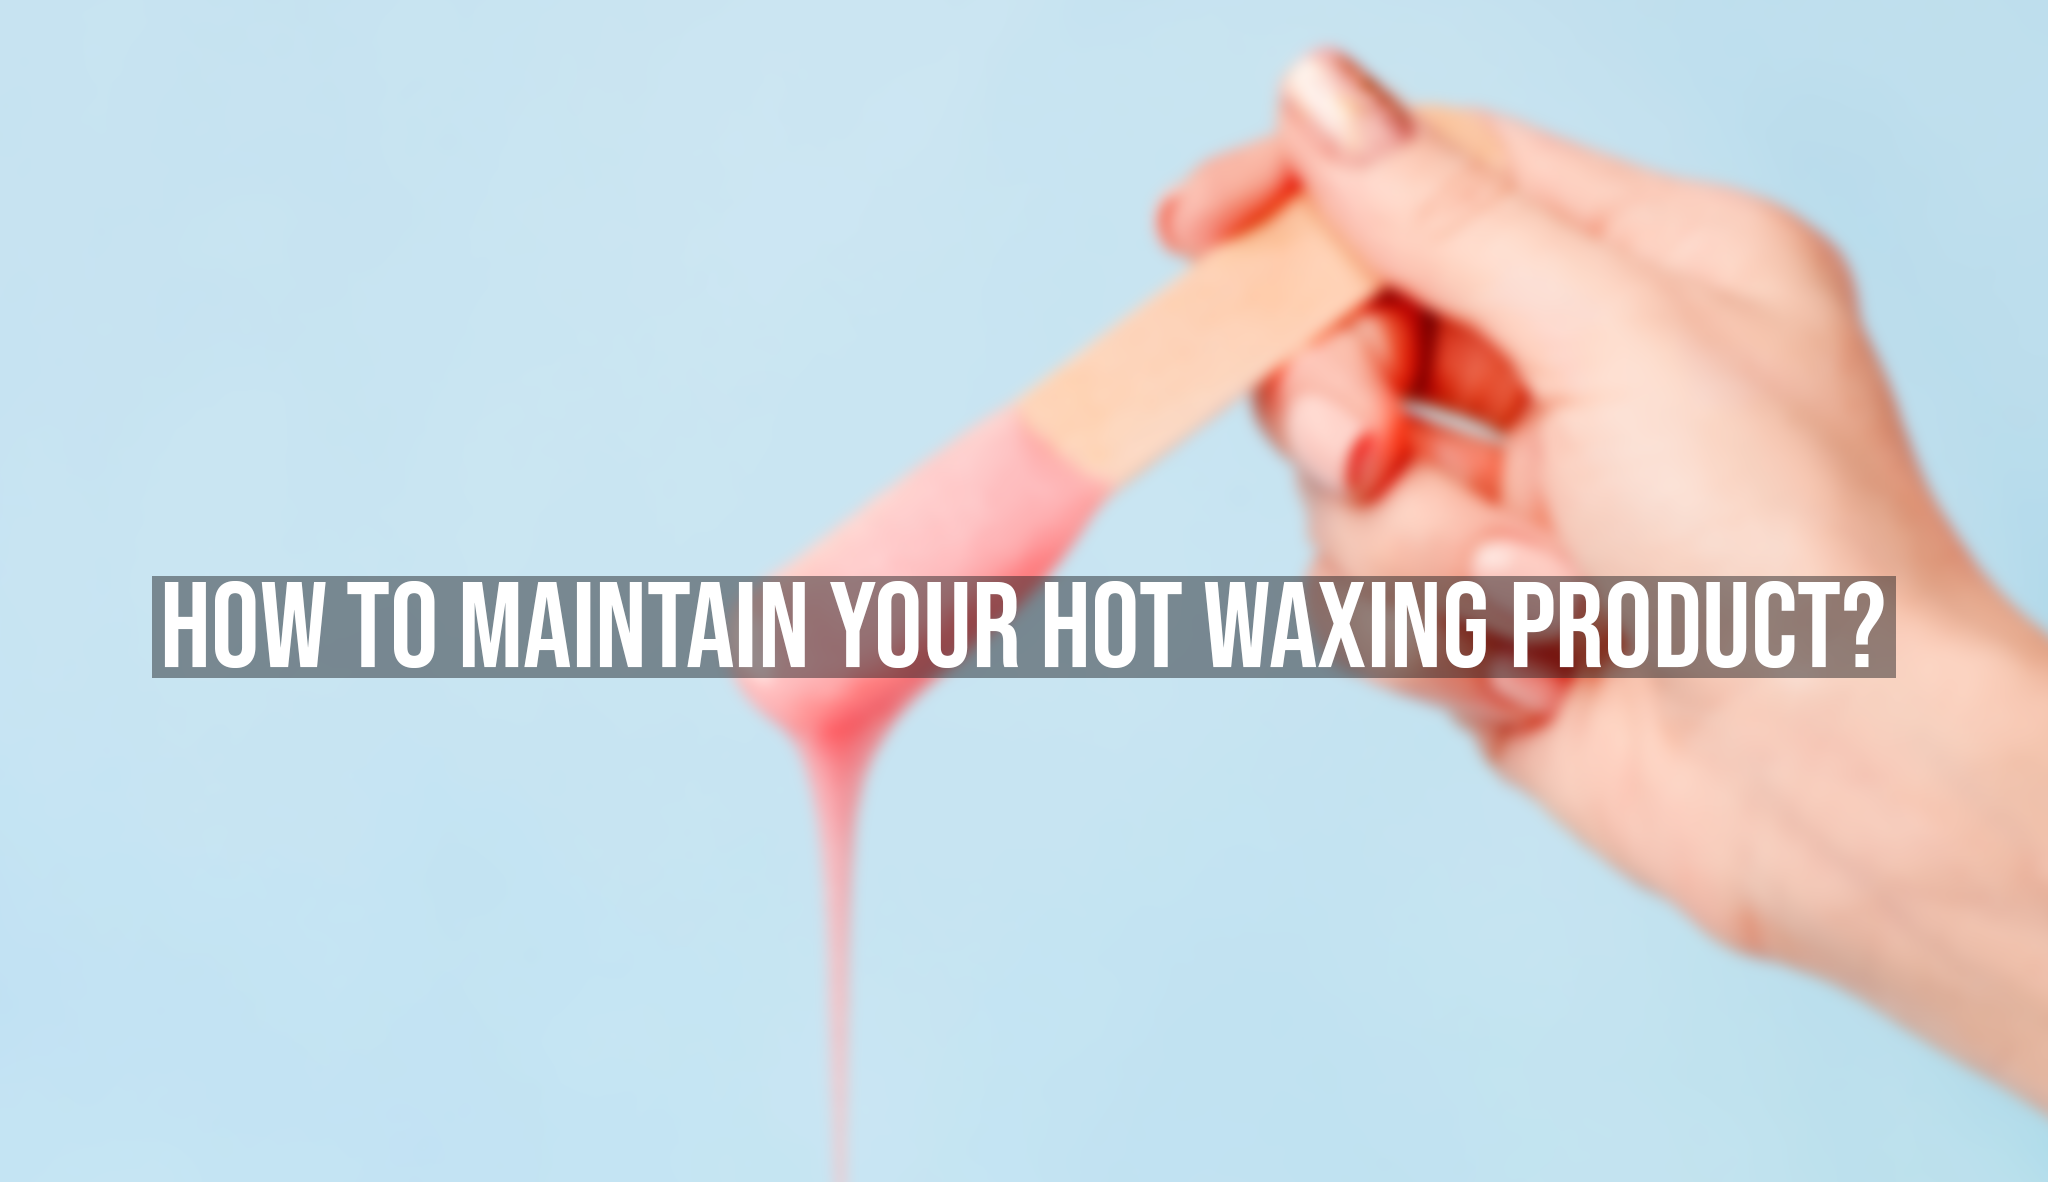 How to Maintain Your Hot Waxing Product - Verrolyne Training